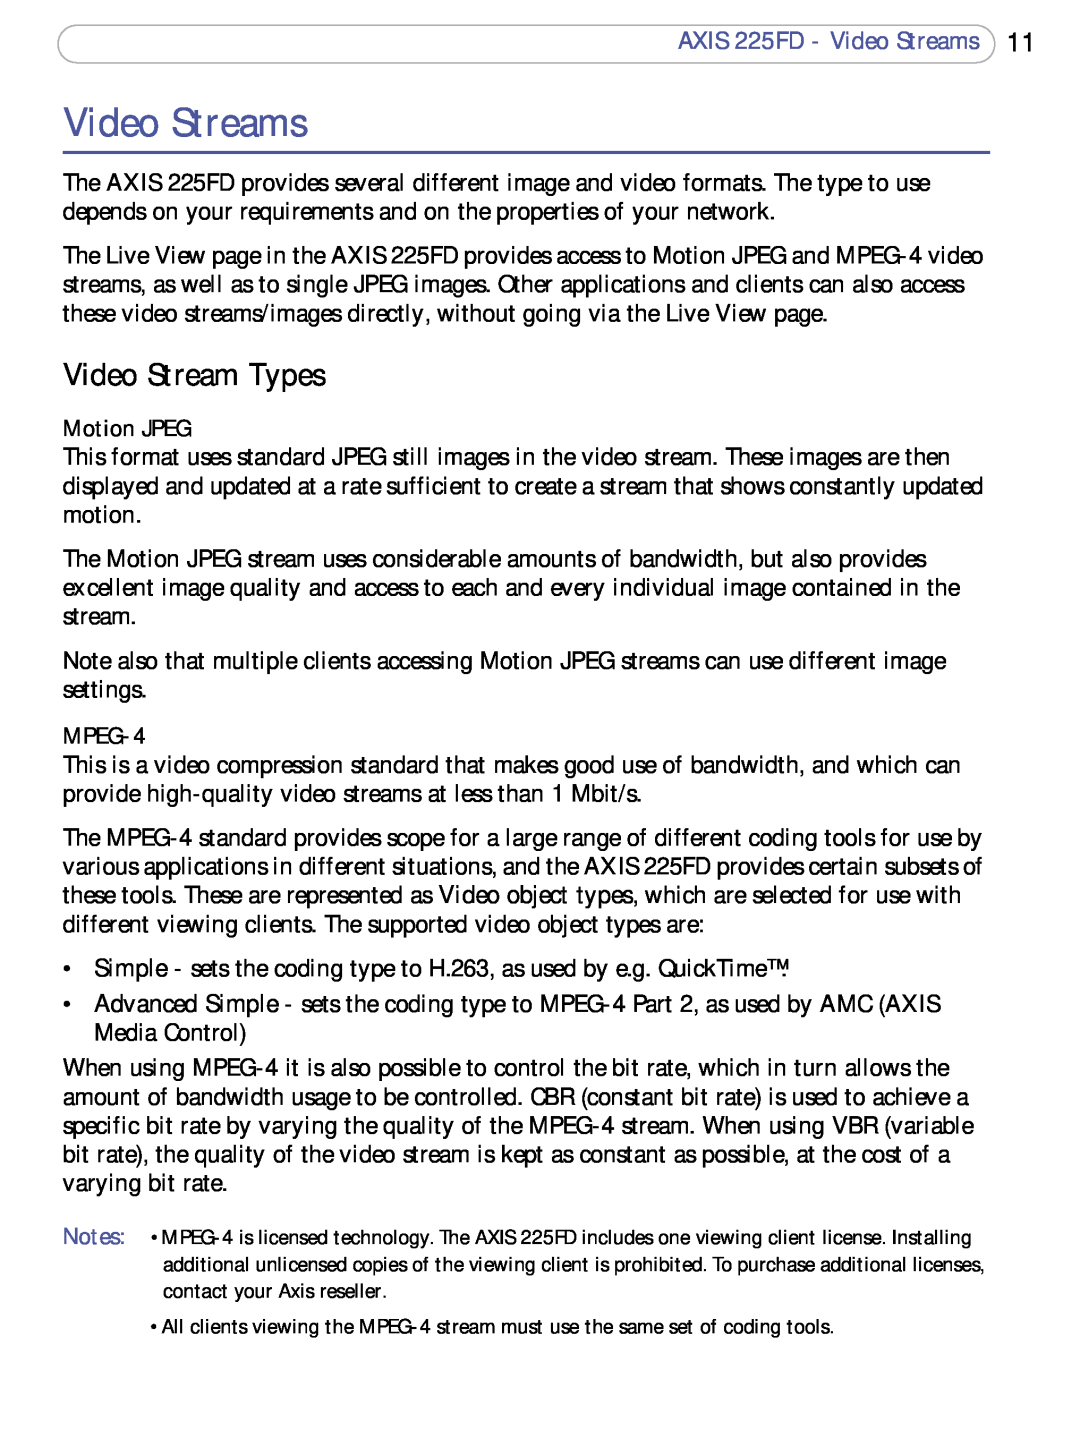 Axis Communications user manual Video Stream Types, AXIS 225FD - Video Streams, Motion JPEG, MPEG-4 